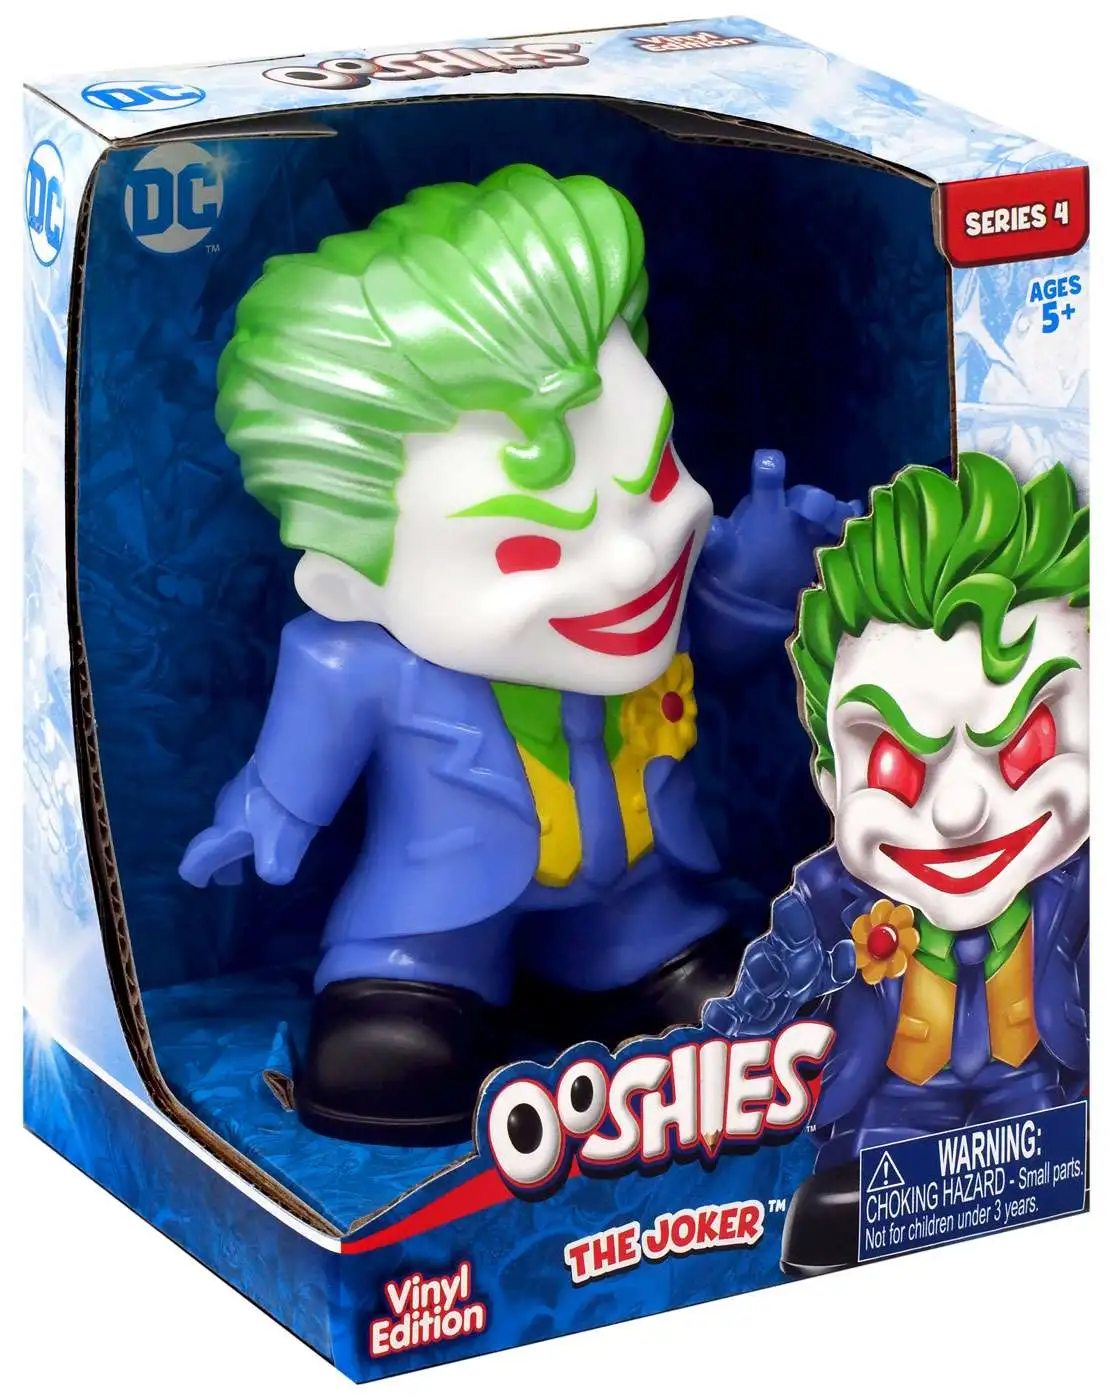 ooshies Exclusive limited edition WHITE JOKER BATMAN DC Comic Pencil Toppers toy 